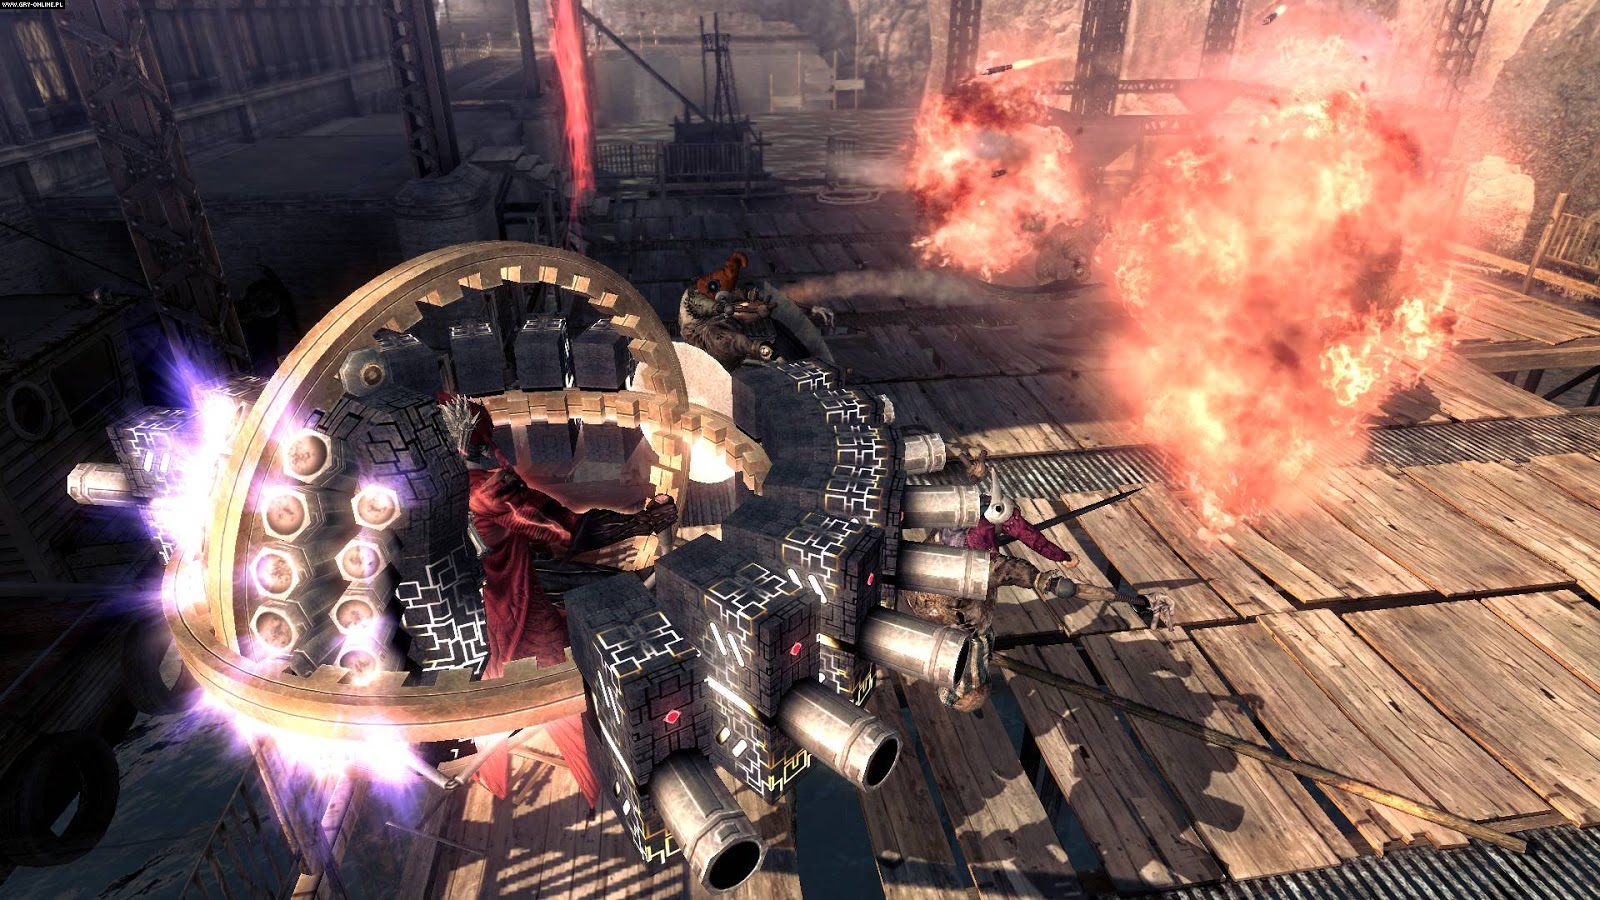 devil may cry 4 special edition crashes pc settings